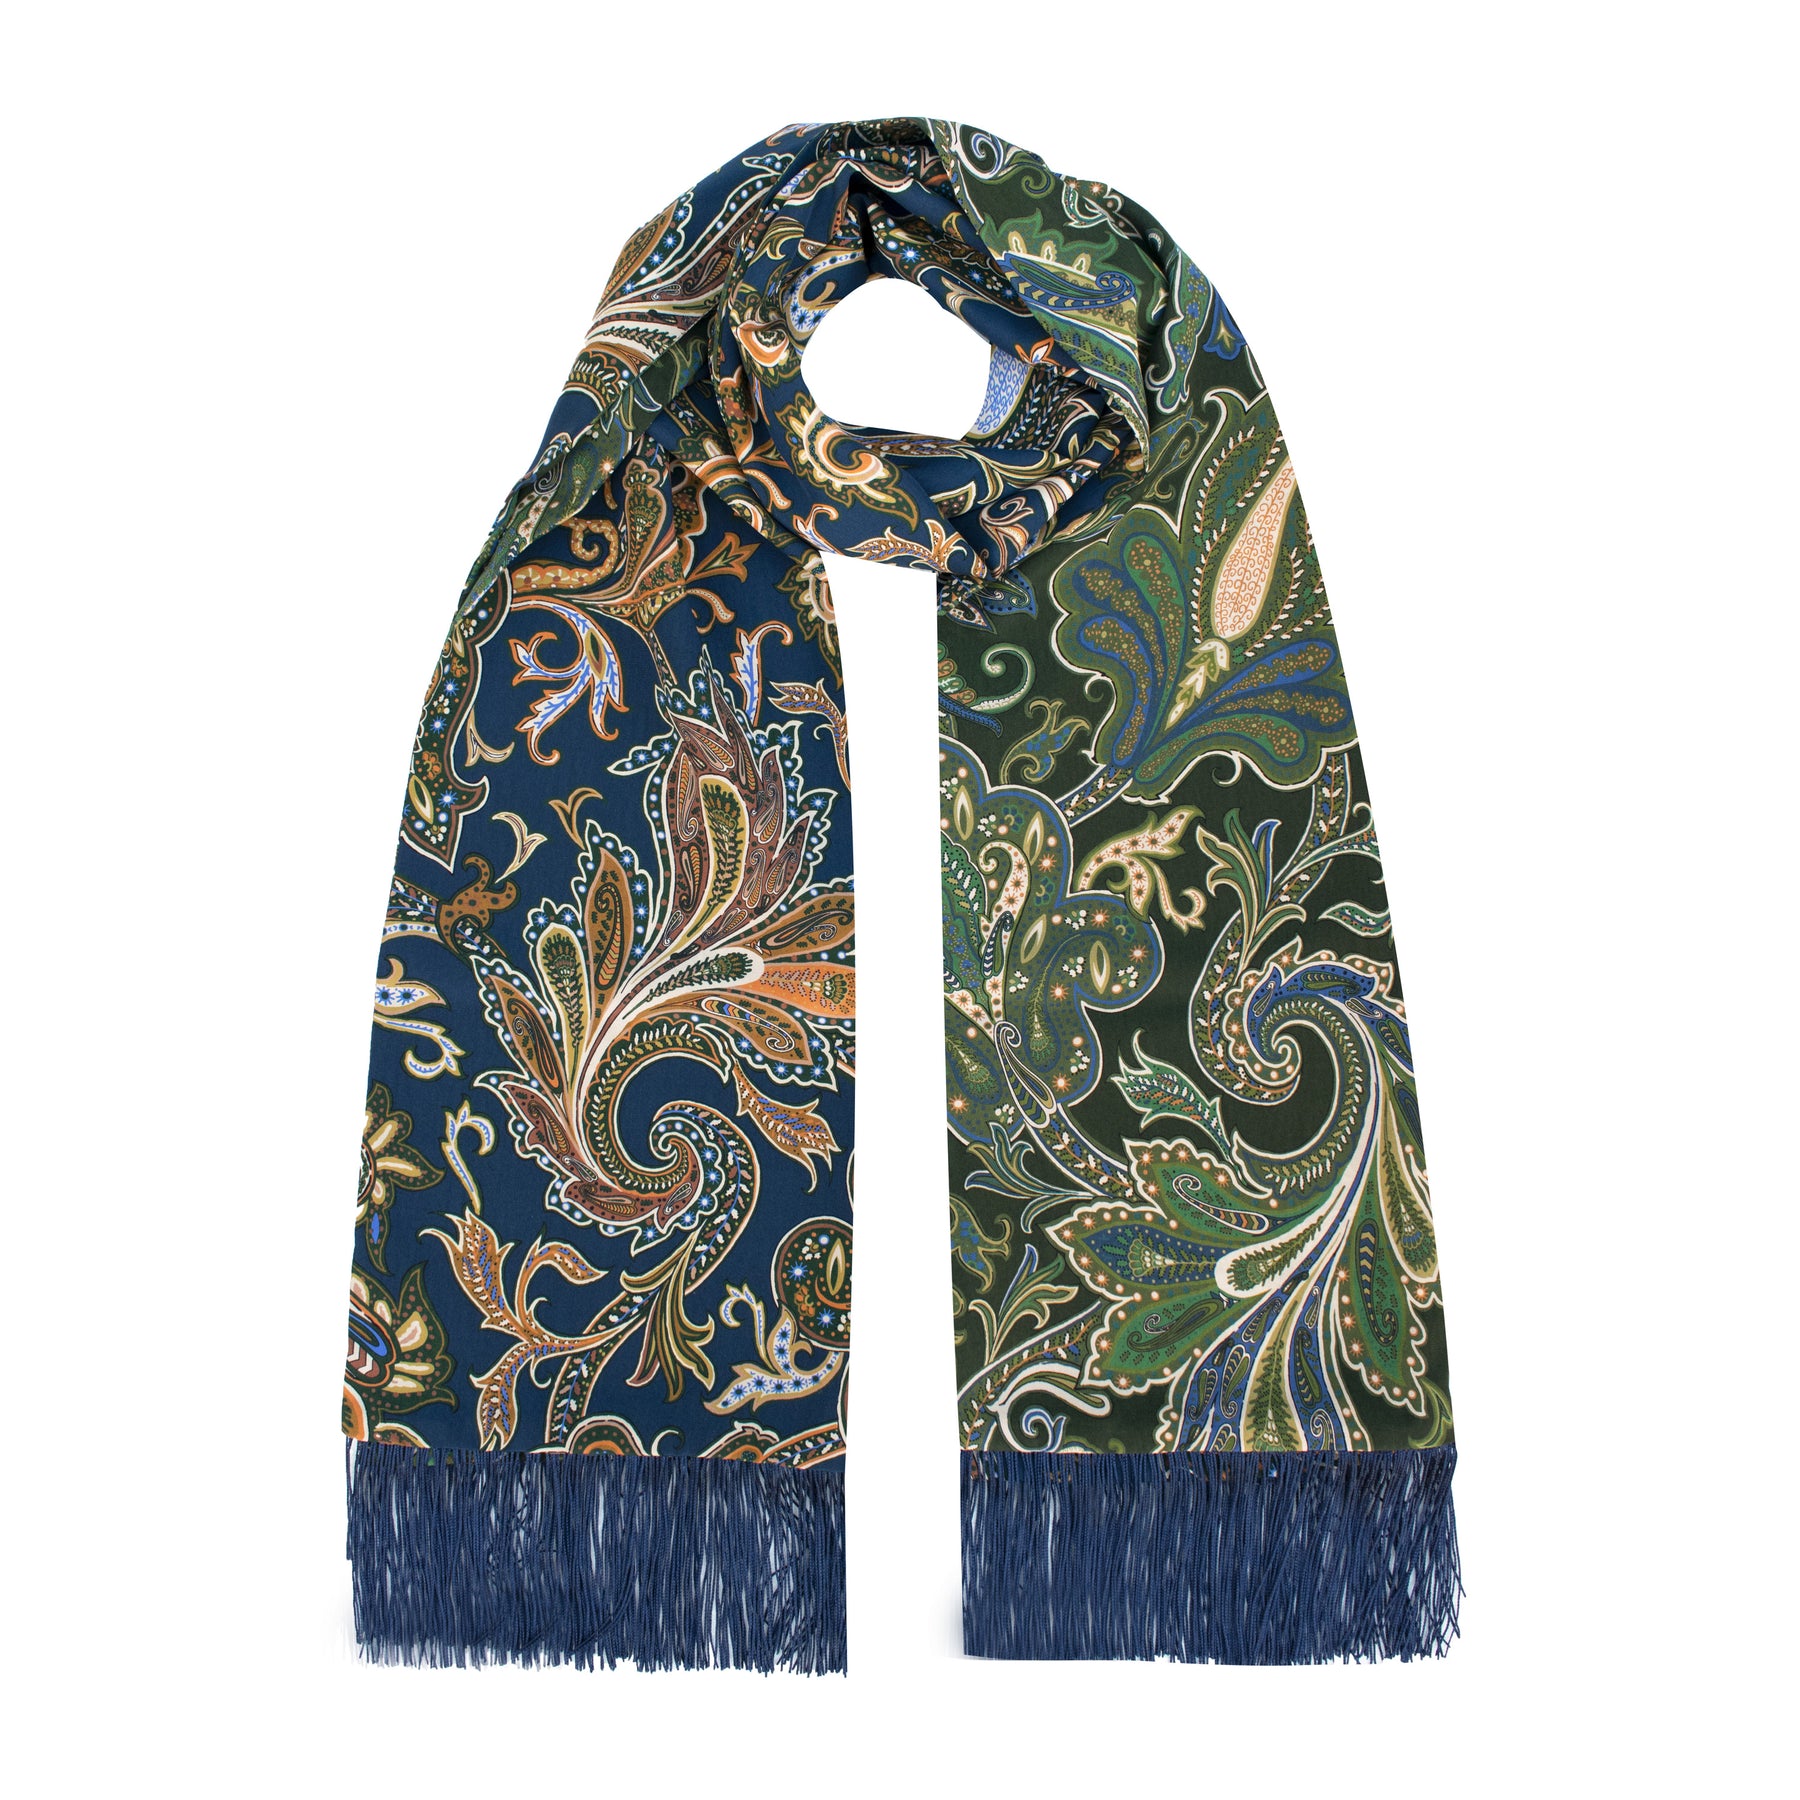 DOUBLEFACE SILK SCARF WITH CASHMERE MOTIF PRINTED AND FRINGES                                                            SKU: VOGUE